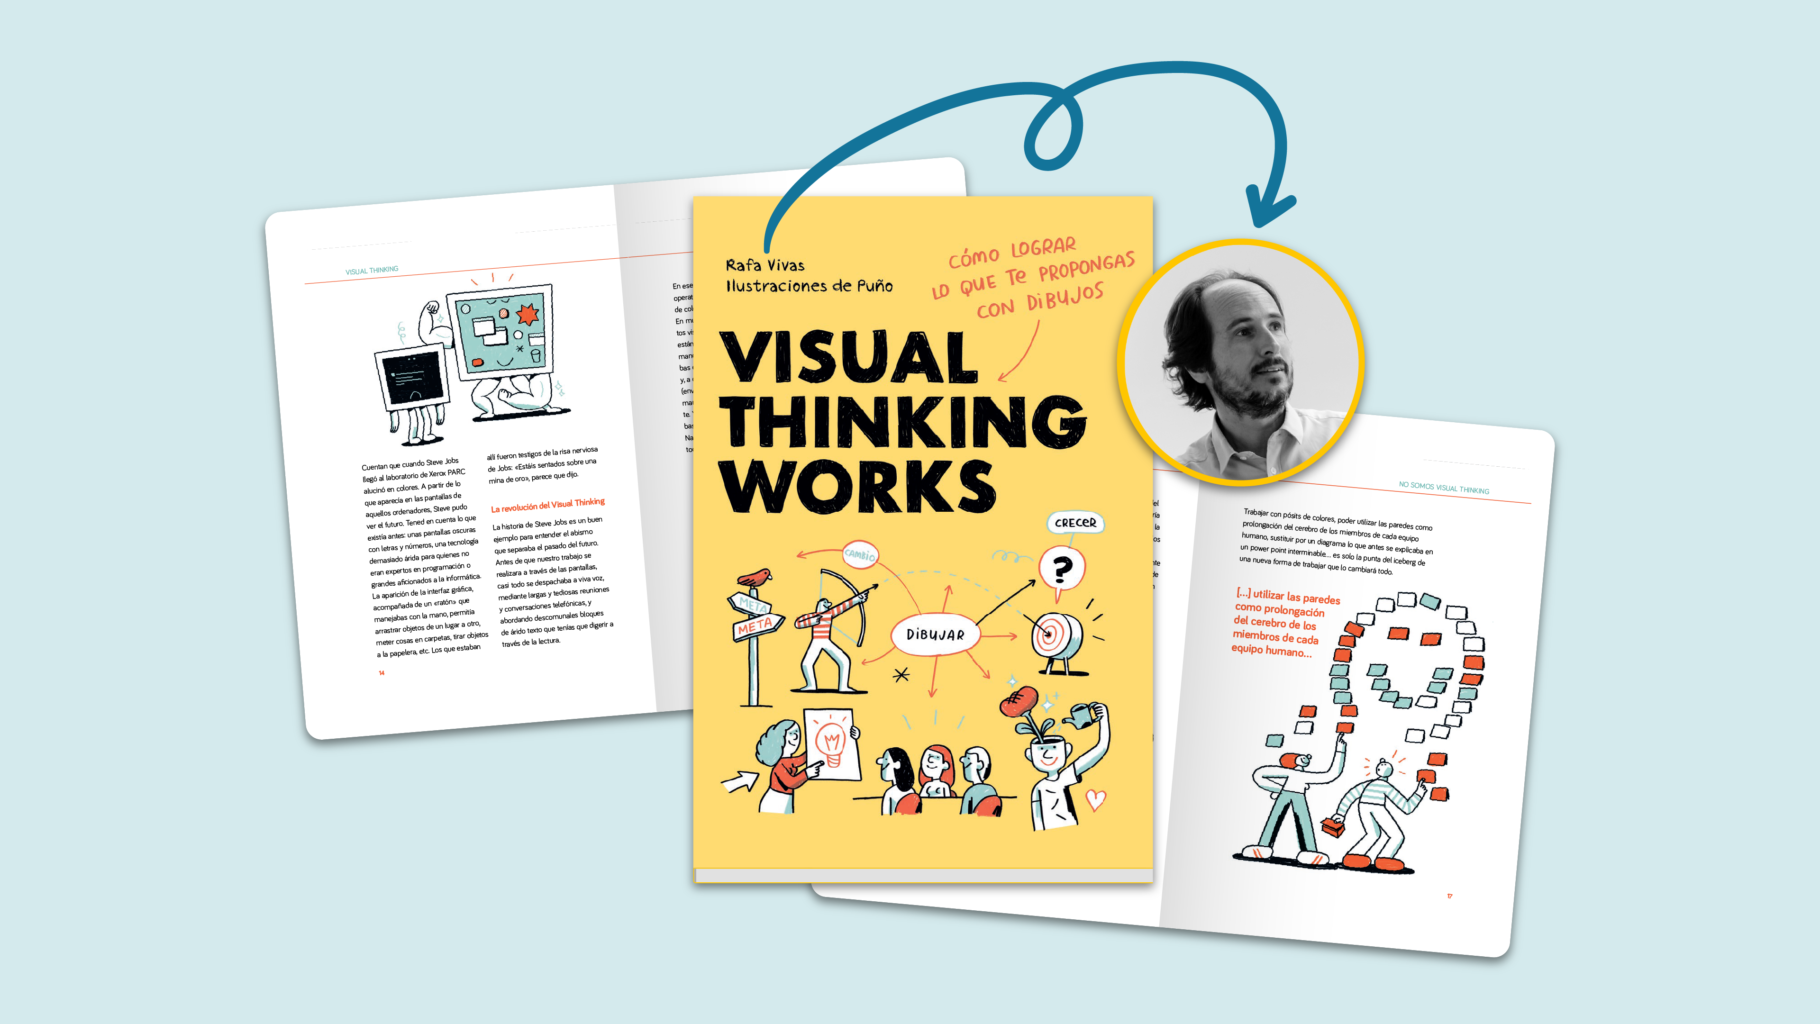 Visual Thinking Works sitting on top of two spreads from inside of the book. A blue arrow points to a headshot of author, Rafa Vivas. Against a light blue background.